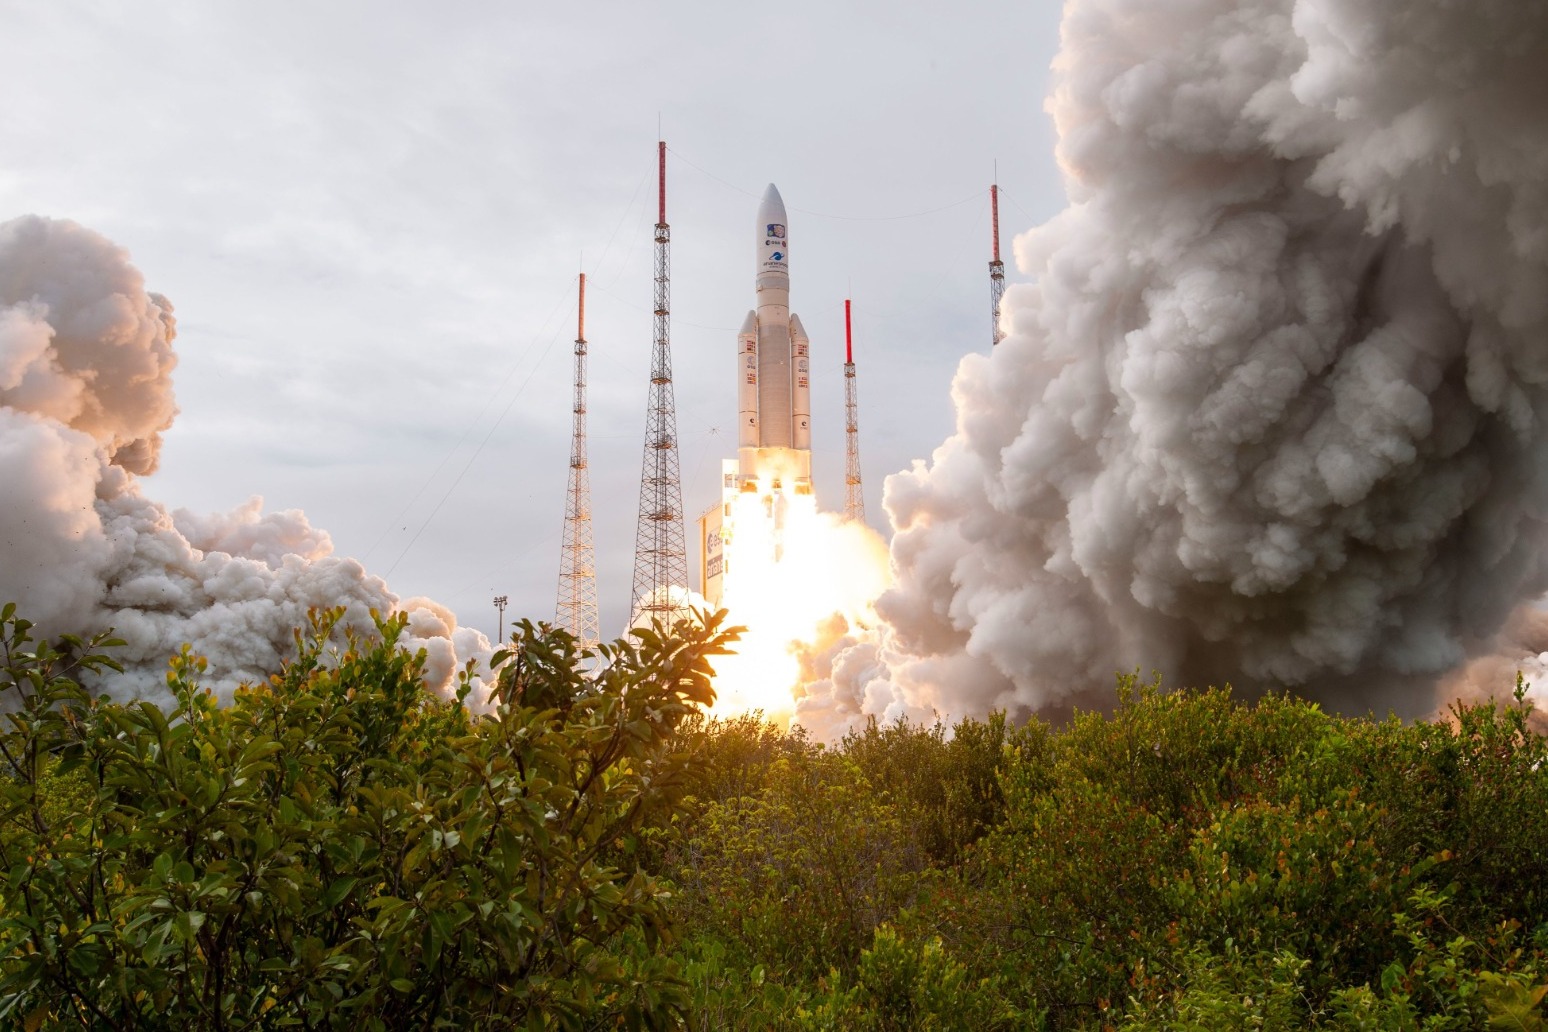 Europe’s Juice spacecraft lifts off to explore Jupiter’s moons 